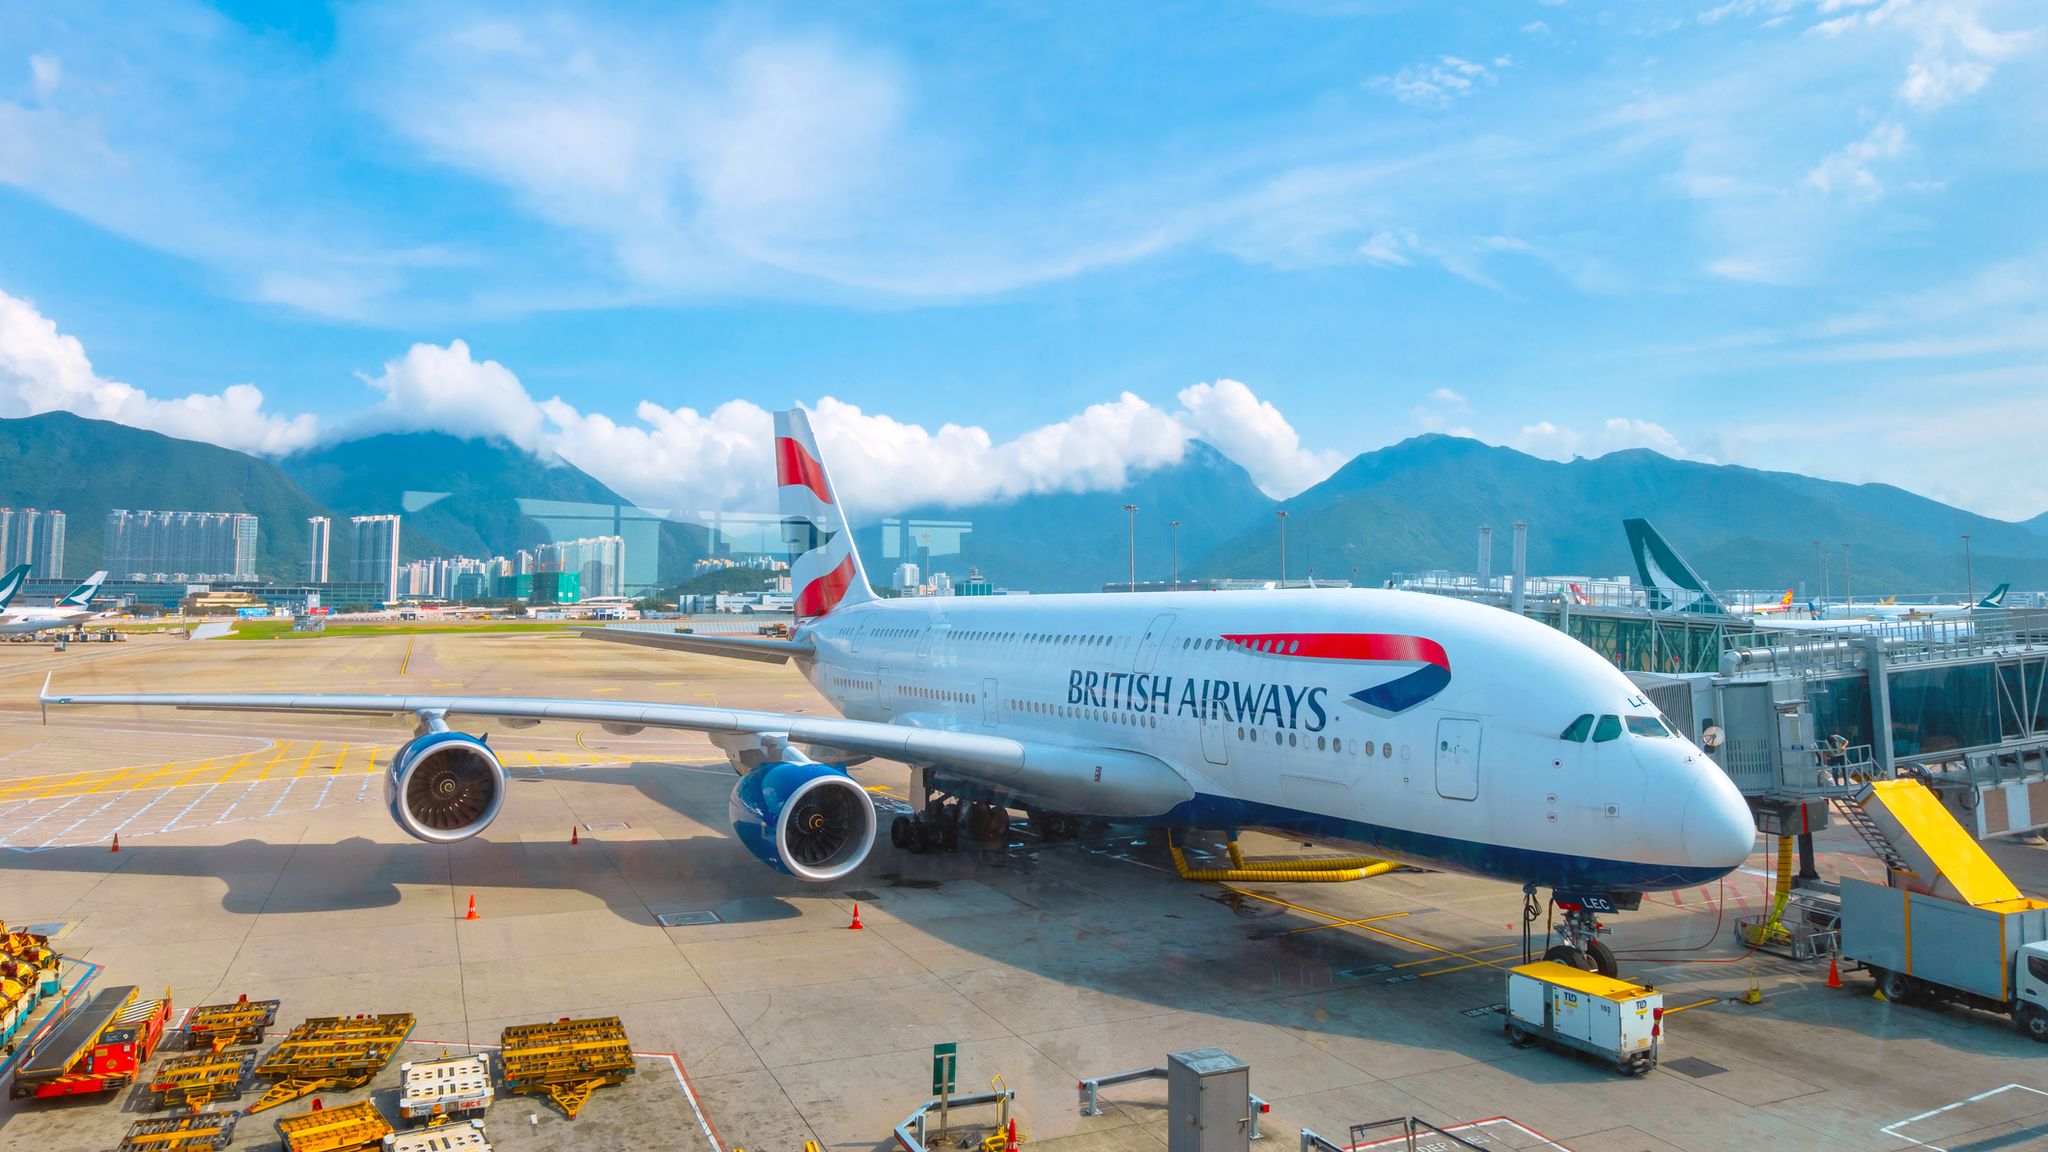 COVID-19: British Airways suspends Hong Kong flights as crew forced to quarantine after one member tests positive for coronavirus | World News | Sky News